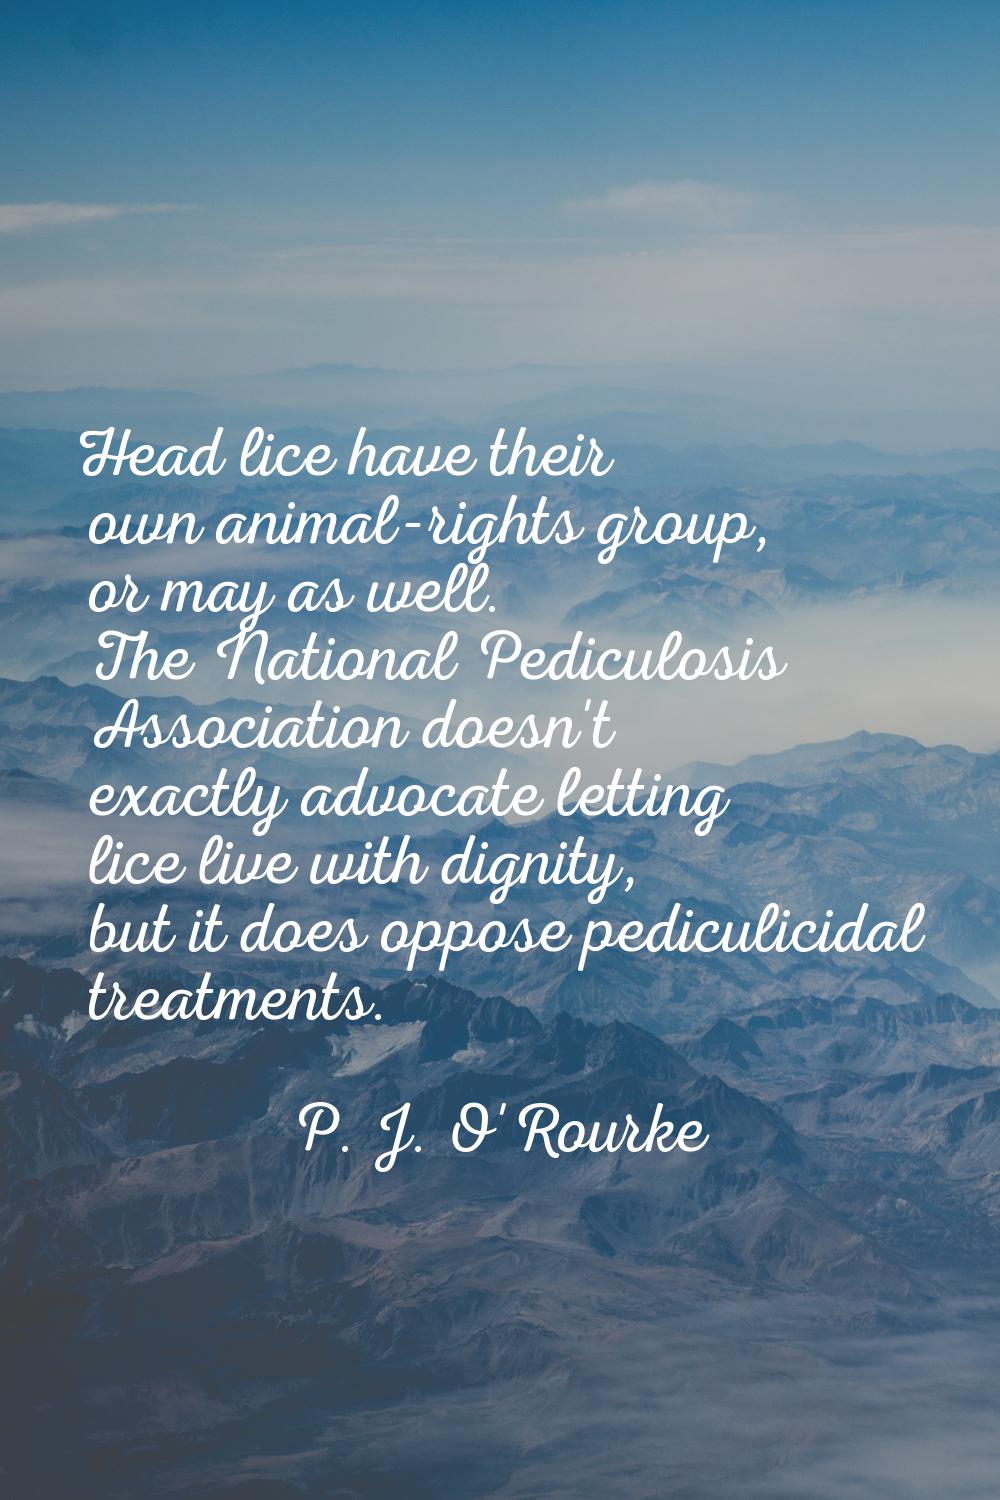 Head lice have their own animal-rights group, or may as well. The National Pediculosis Association 